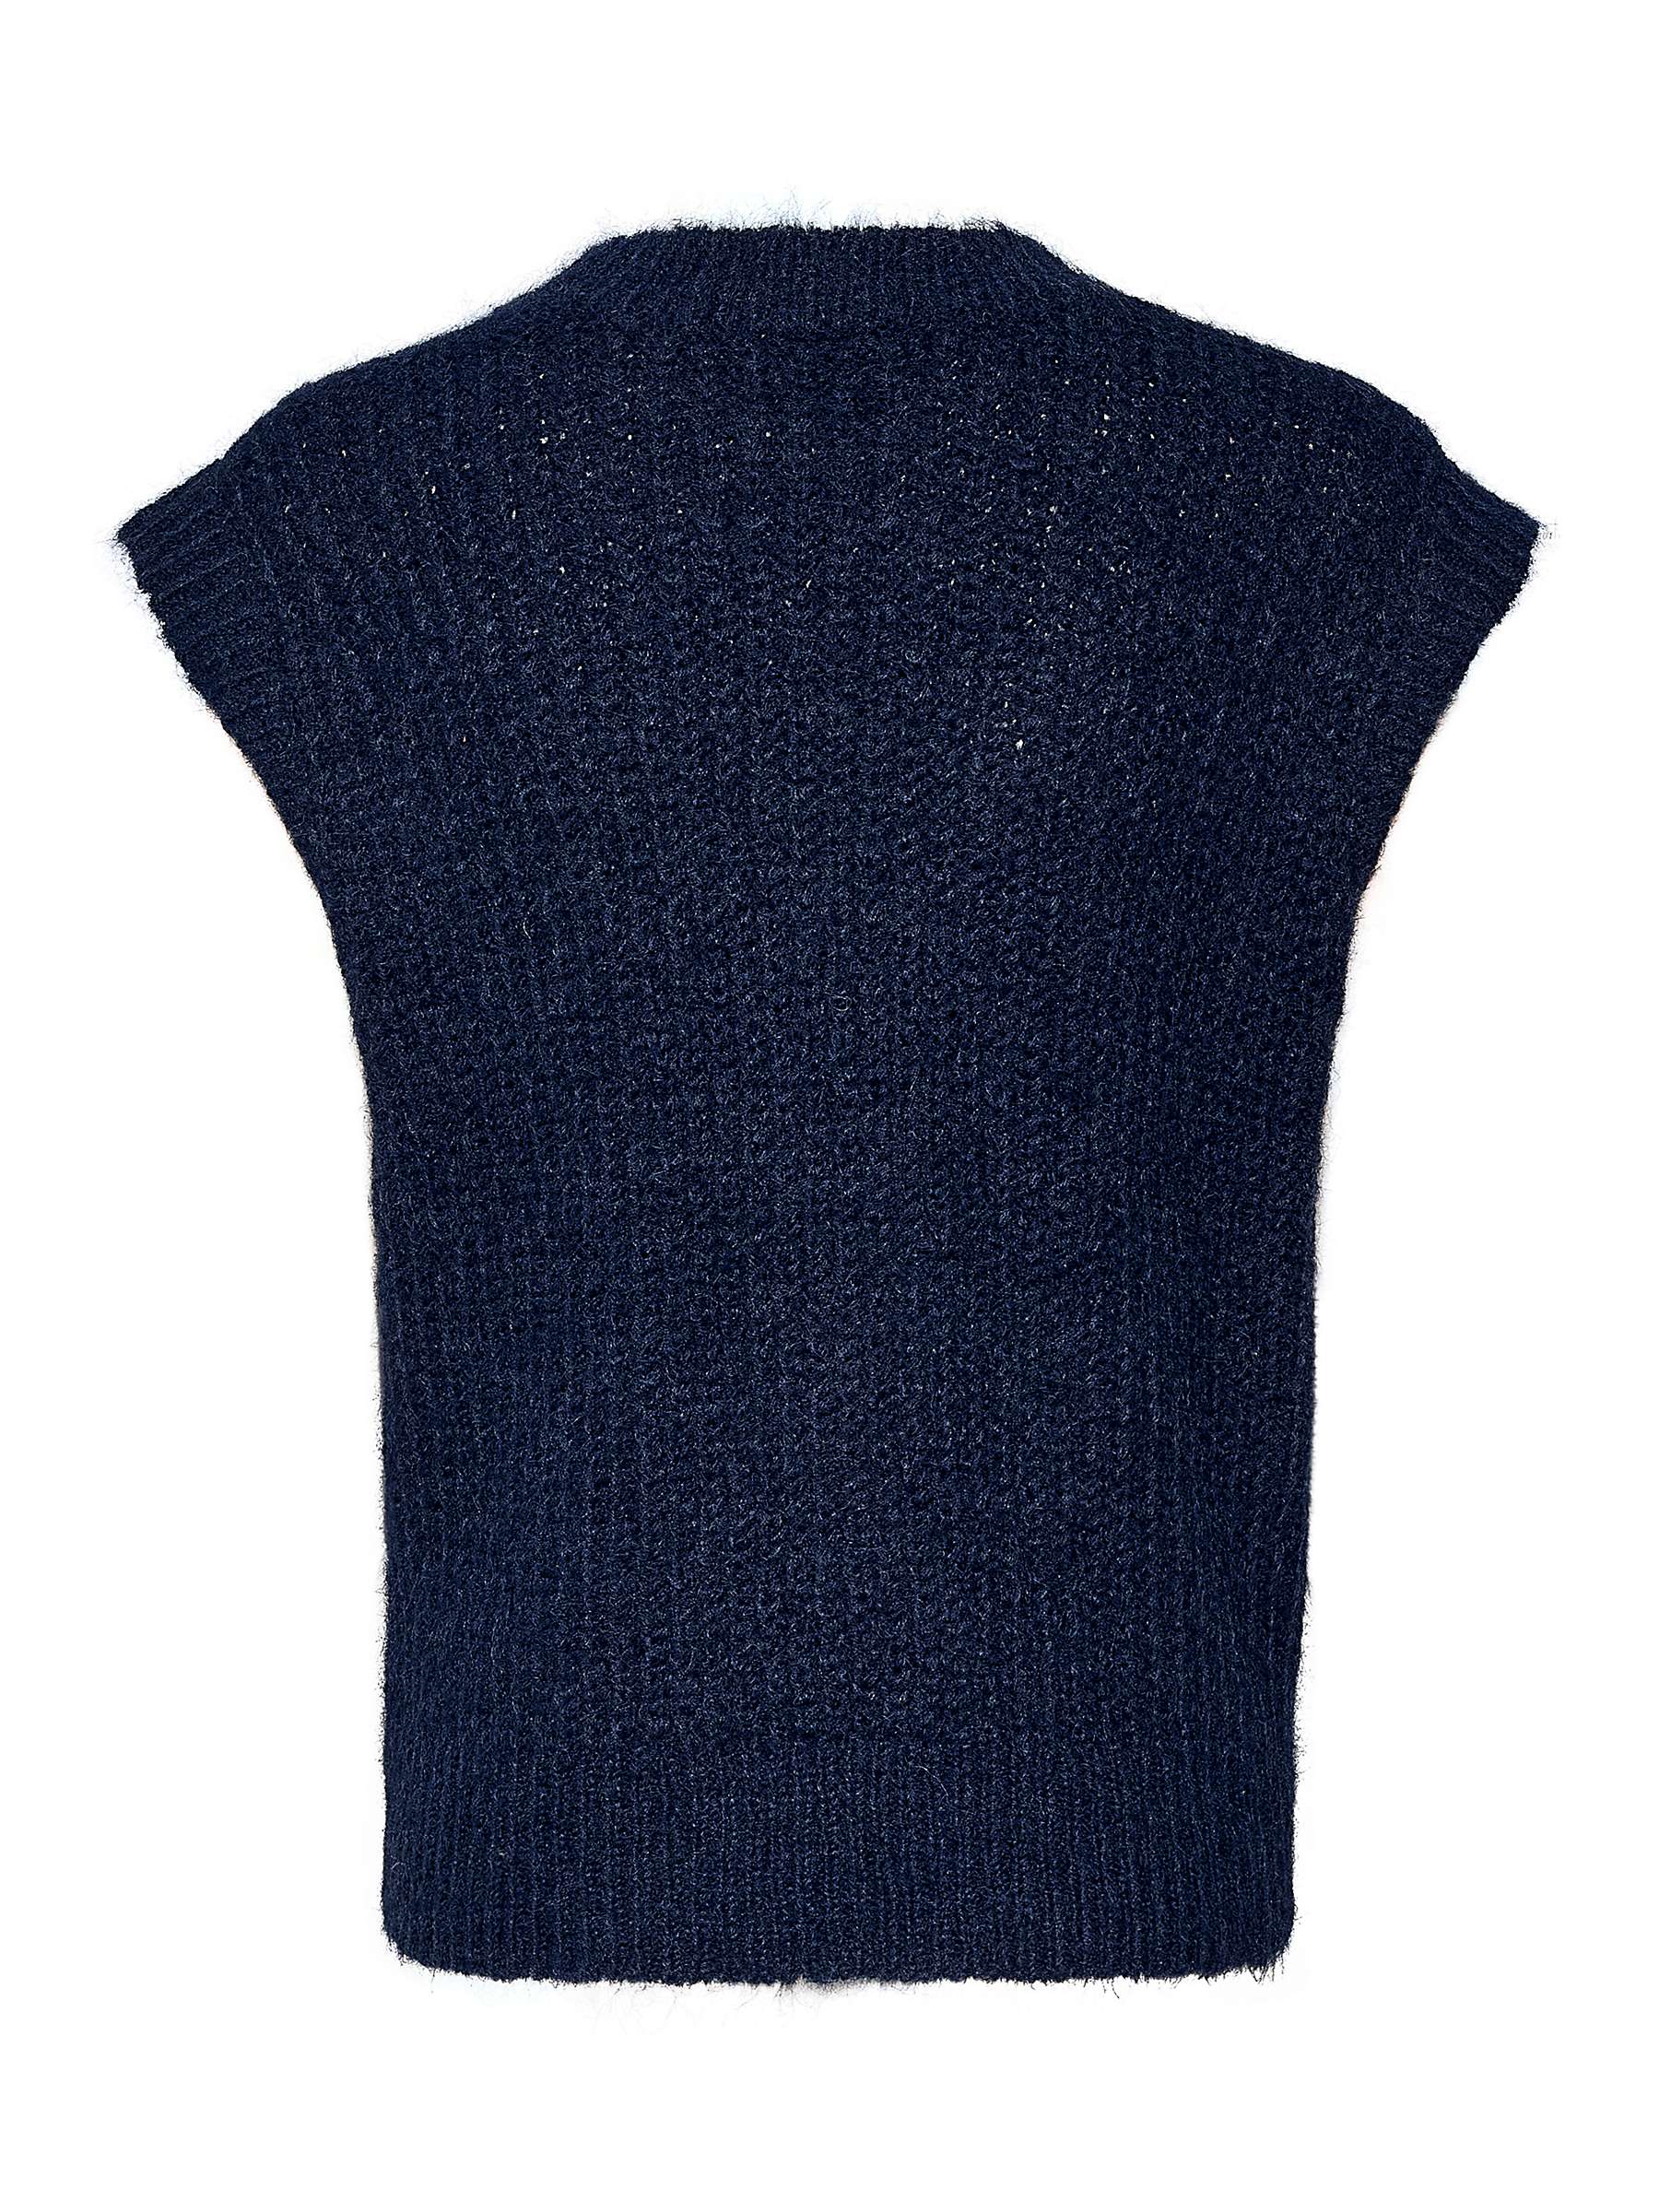 KAFFE Mira Relaxed Fit Knitted Vest, Midnight Marine at John Lewis ...